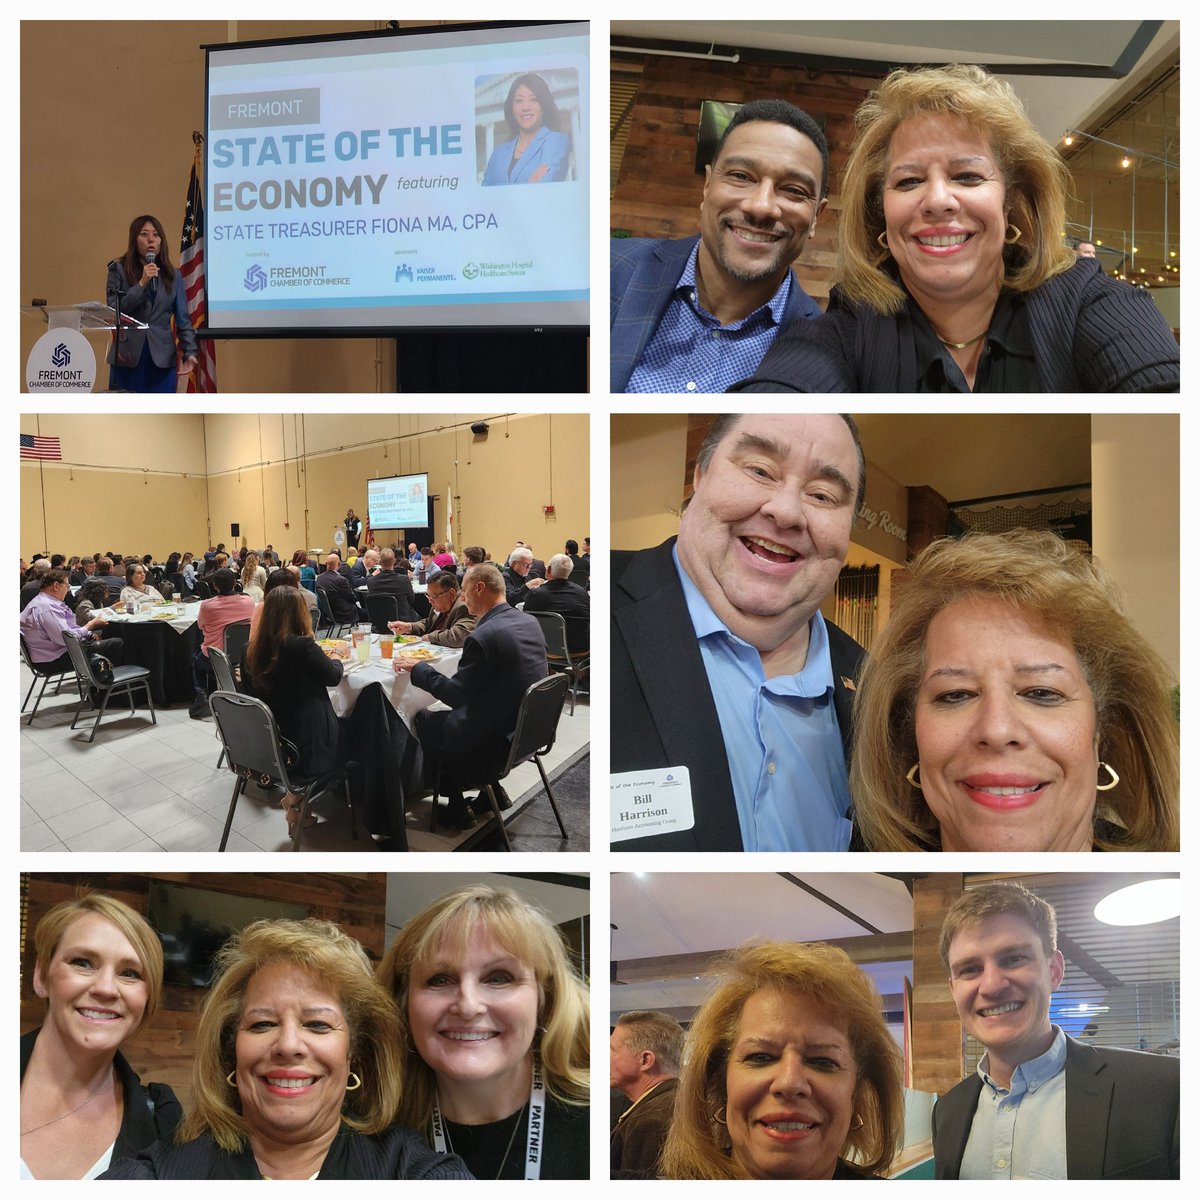 Very informative State of the Economy featuring State Treasurer Fiona Ma by Fremont Chamber of Commerce!! #Fiona  #fremontchamber #smallbiz #supportinglocalbusiness